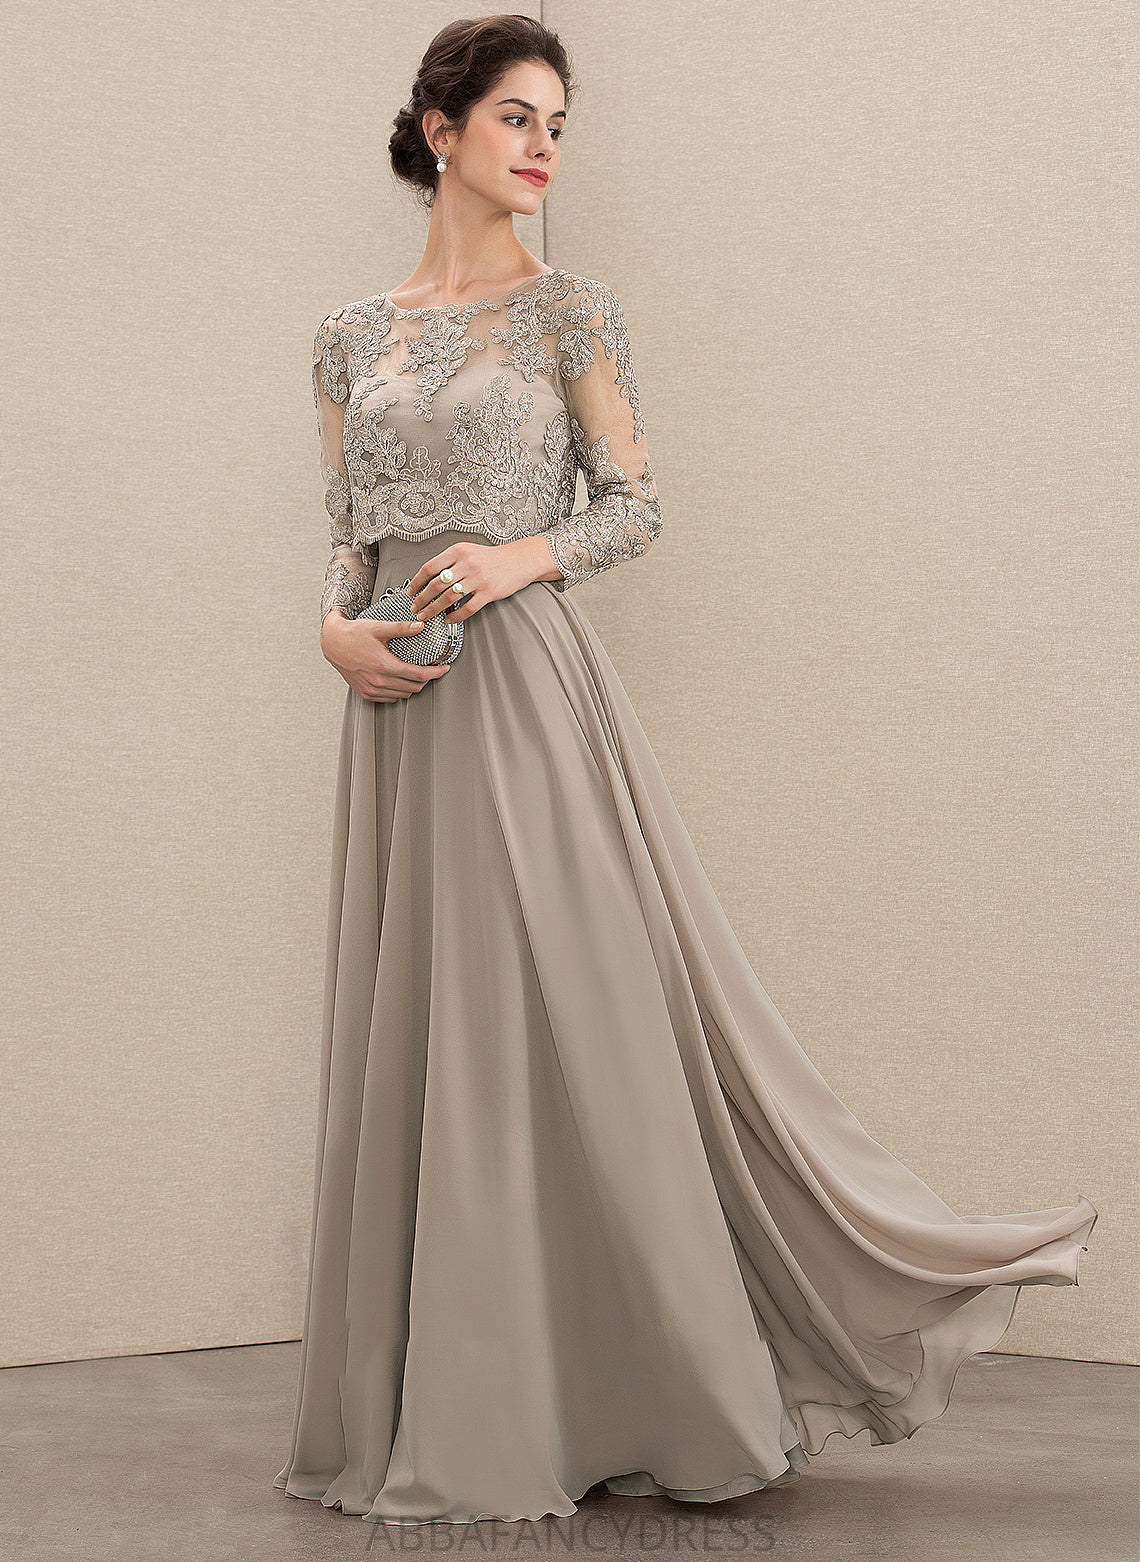 Scoop Chiffon Dress A-Line the Floor-Length Neck Mother of the Bride Dresses of Lace Itzel With Mother Sequins Bride